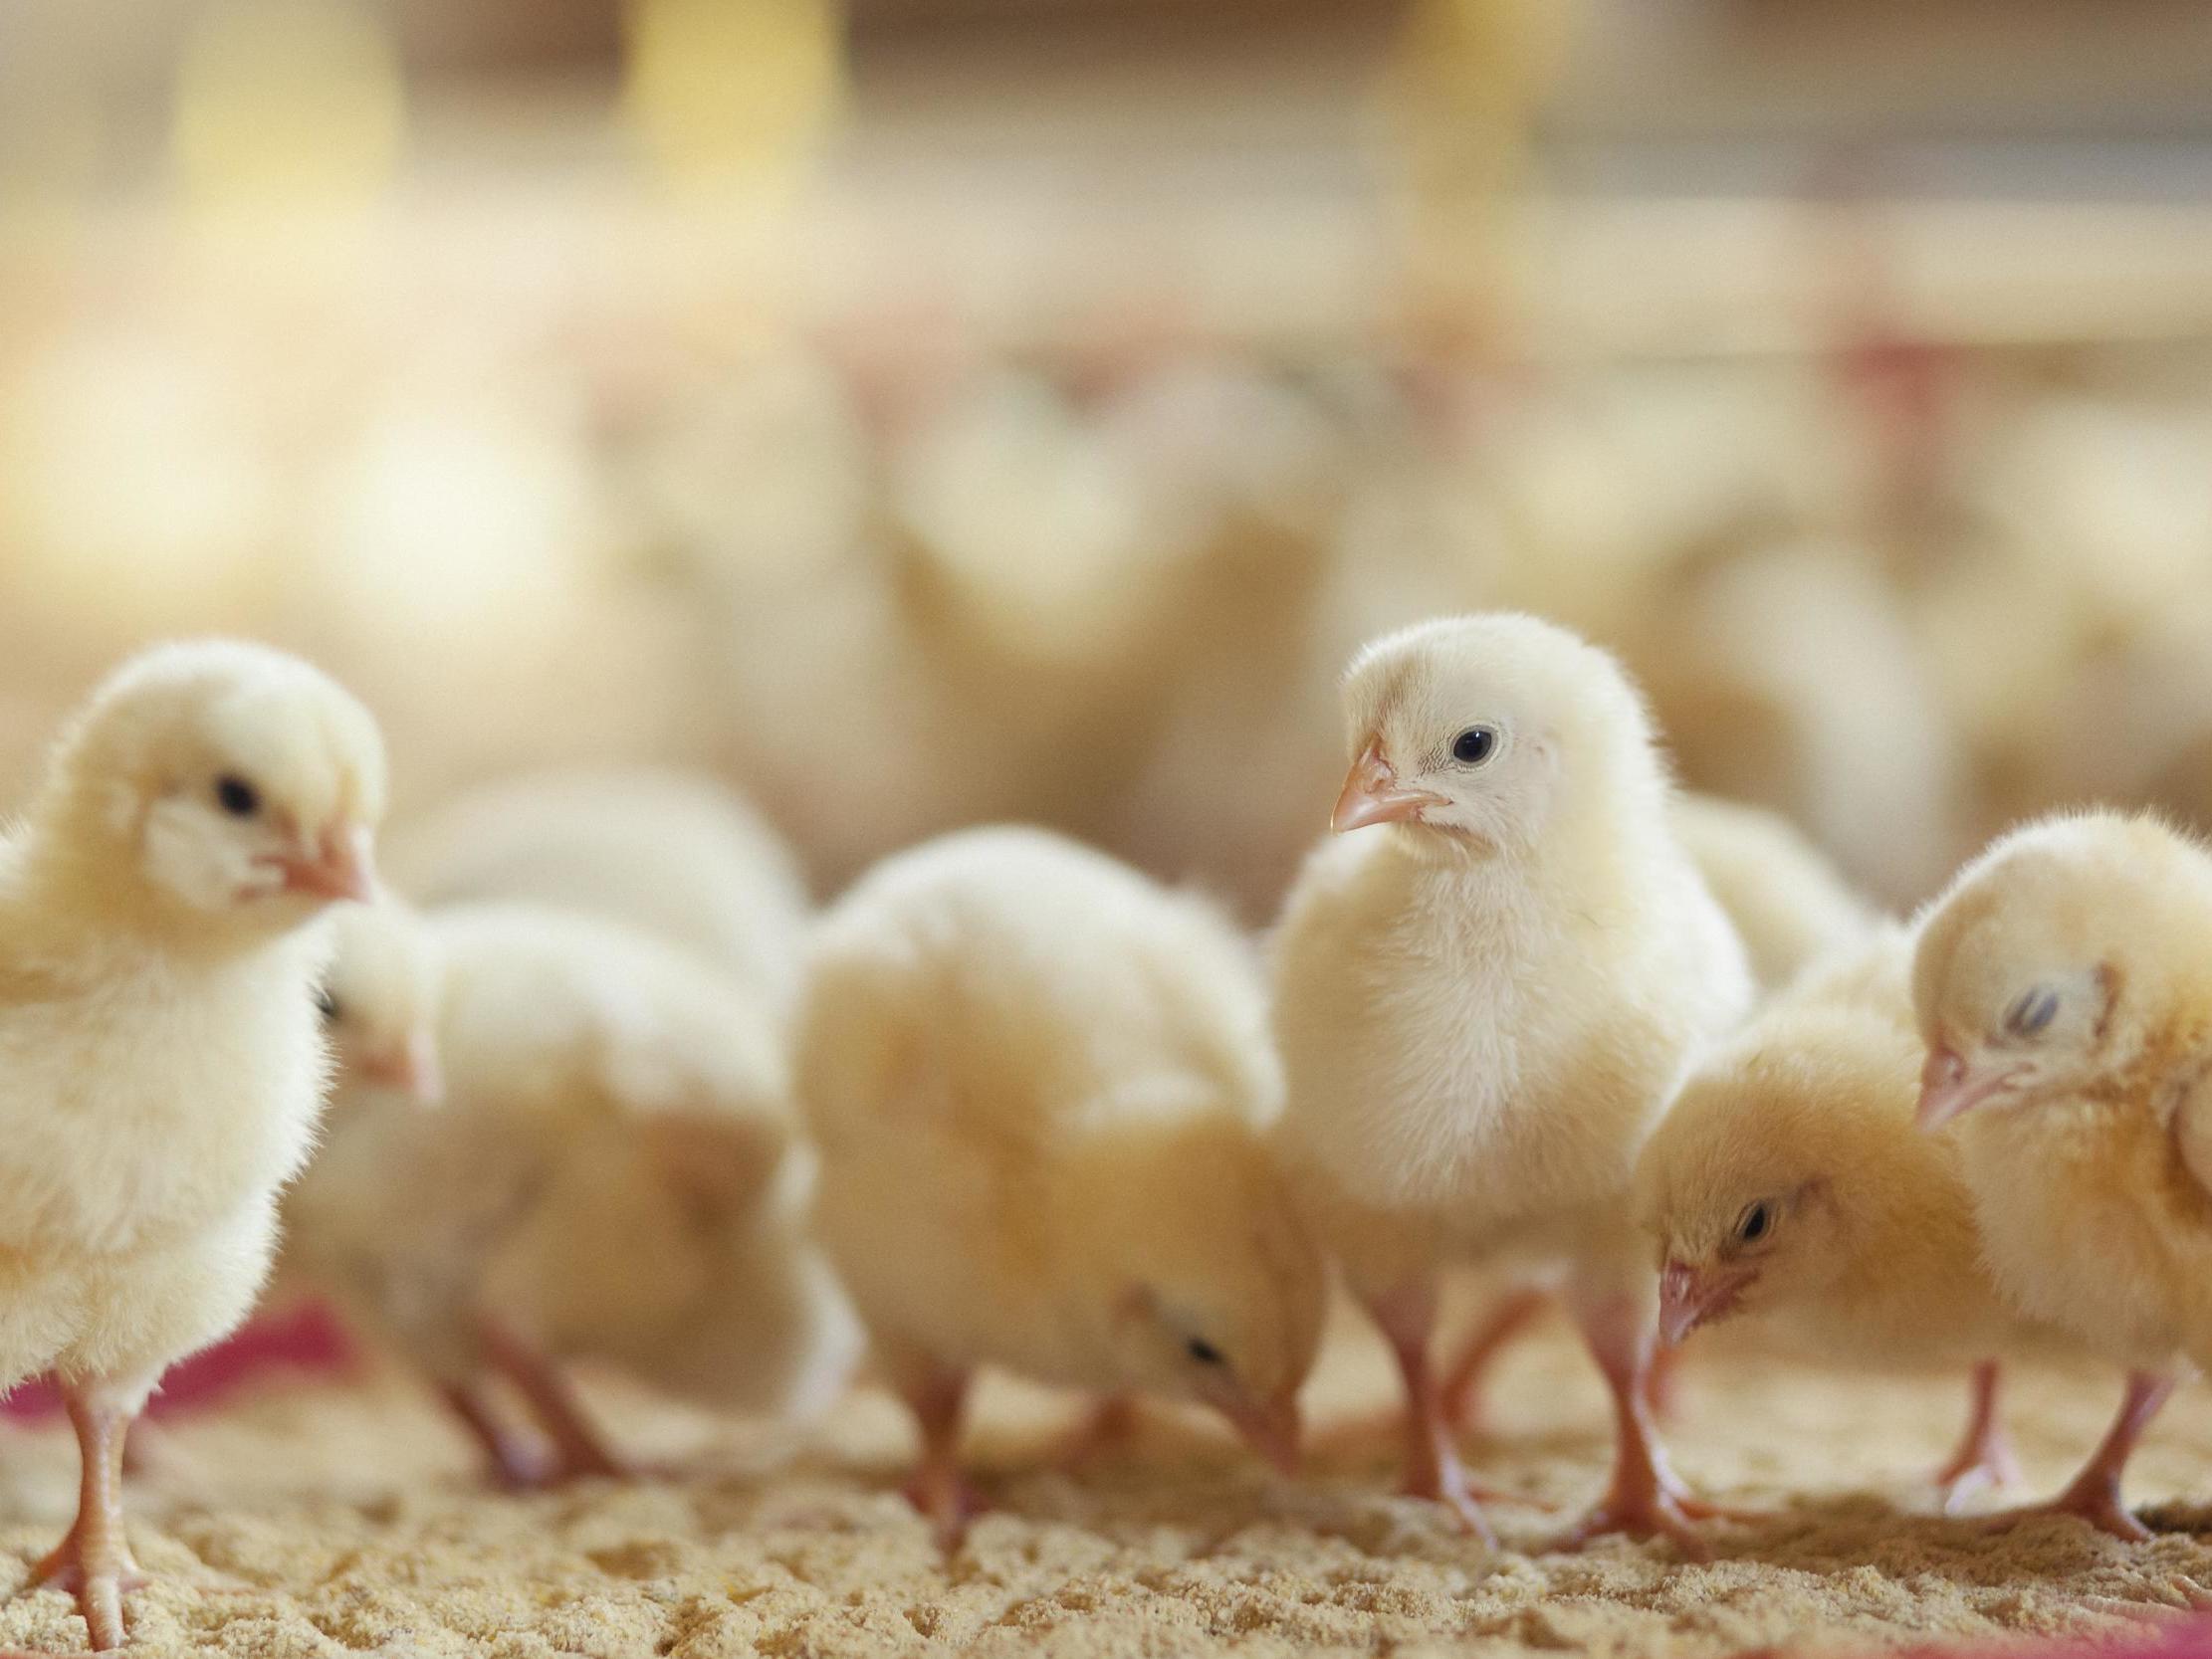 Male chicks may still be killed in the egg-production industry, a court has said